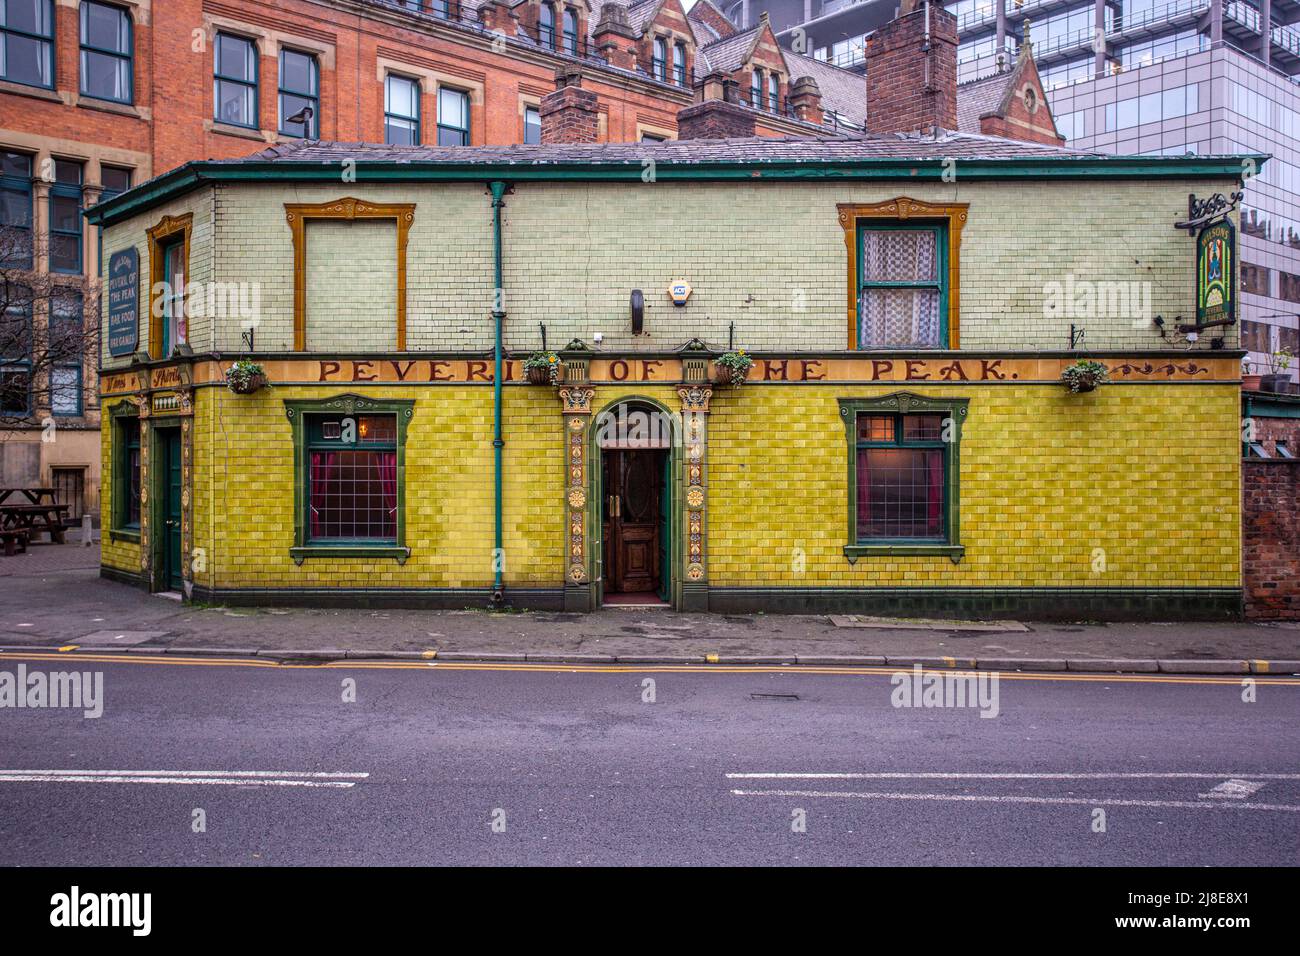 The Peveril of the Peak traditional English city pub, located on Great Bridgewater Street, Manchester, UK. Stock Photo